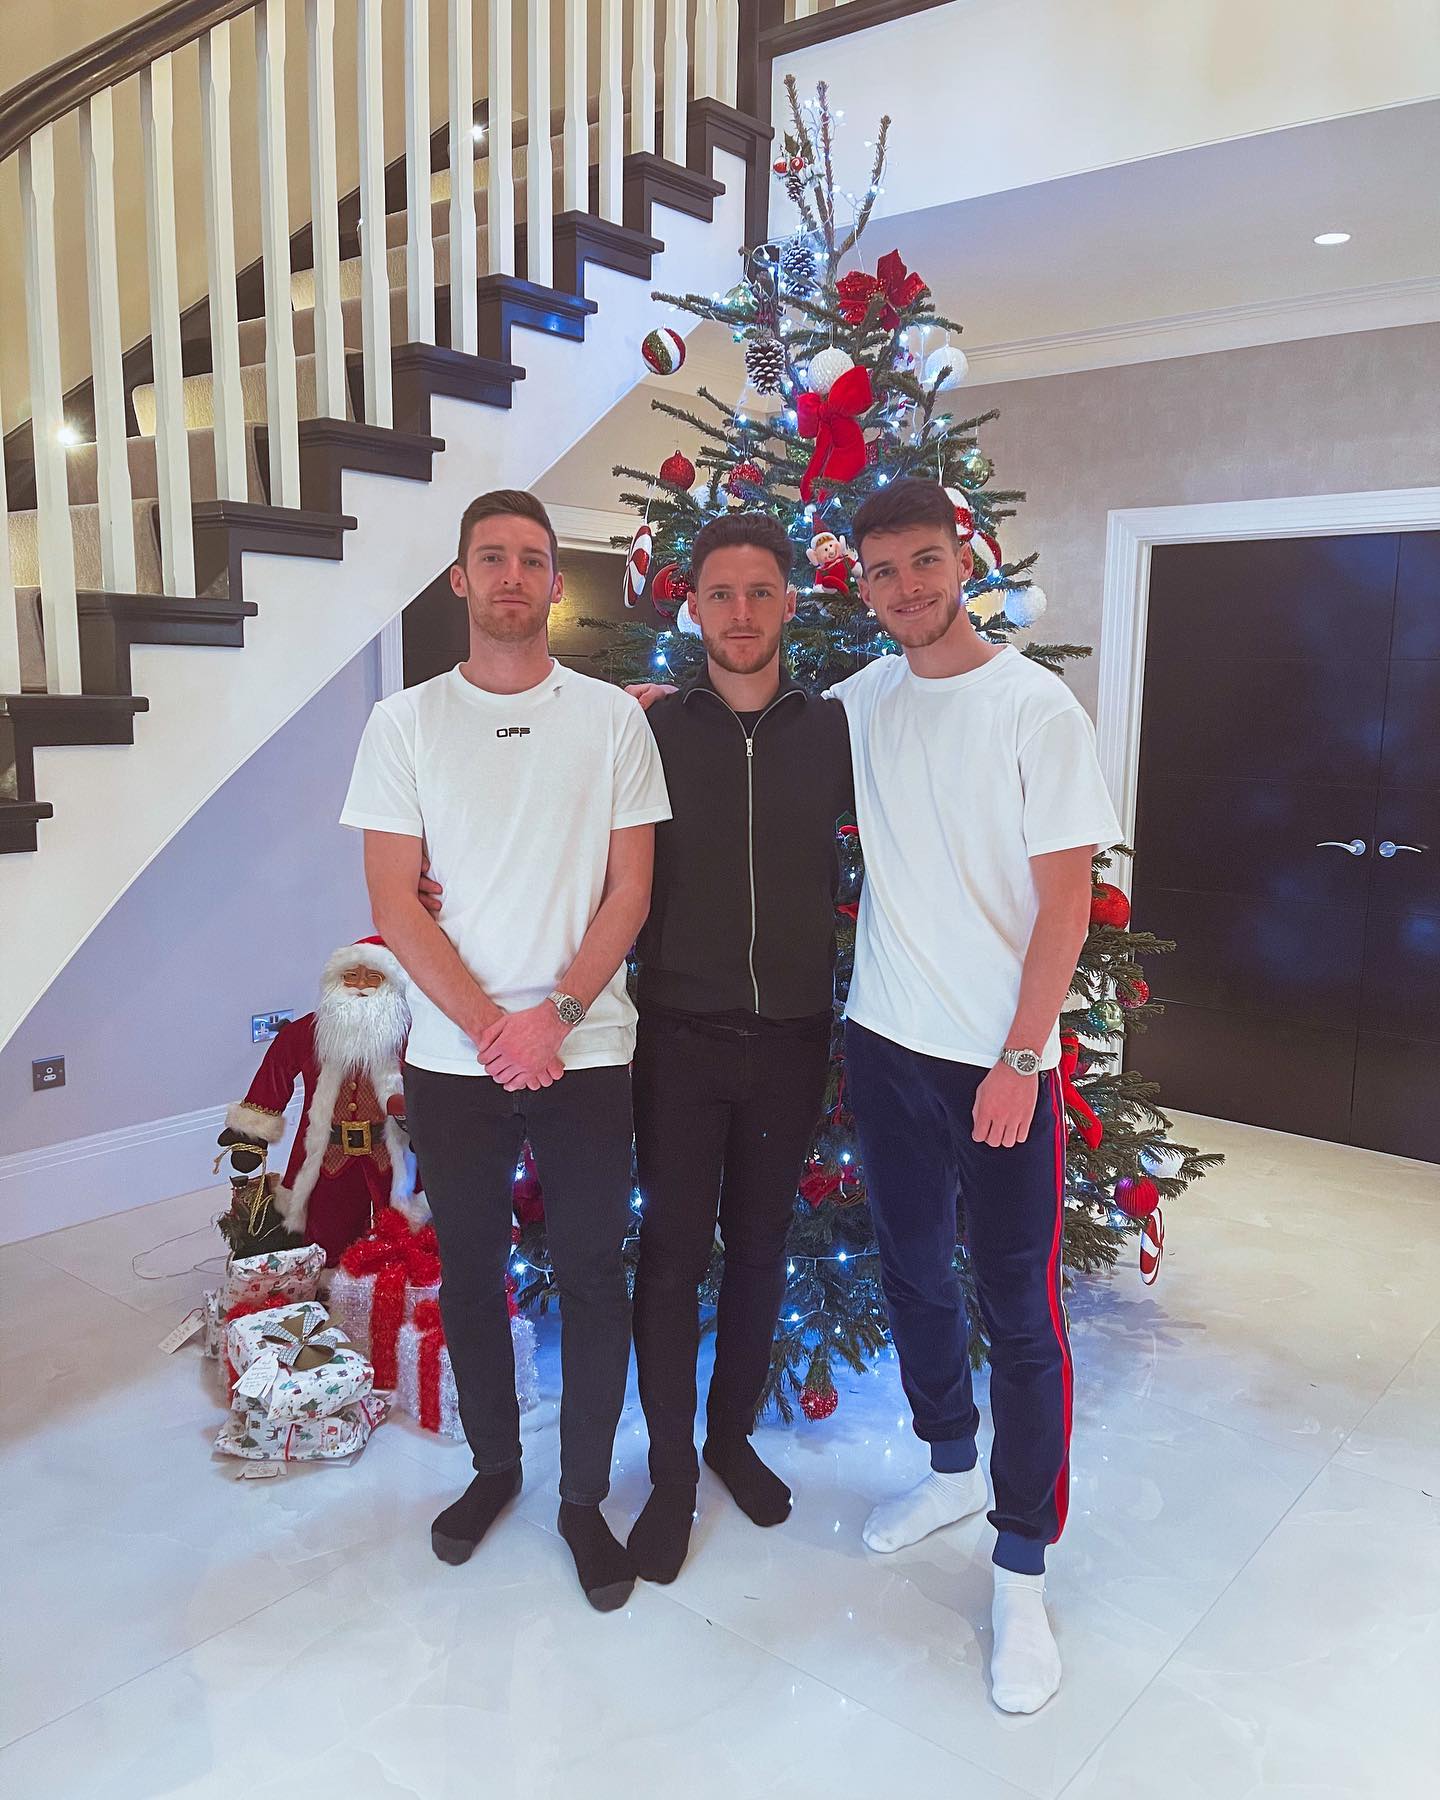 Declan Rice celebrating Christmas with his two siblings